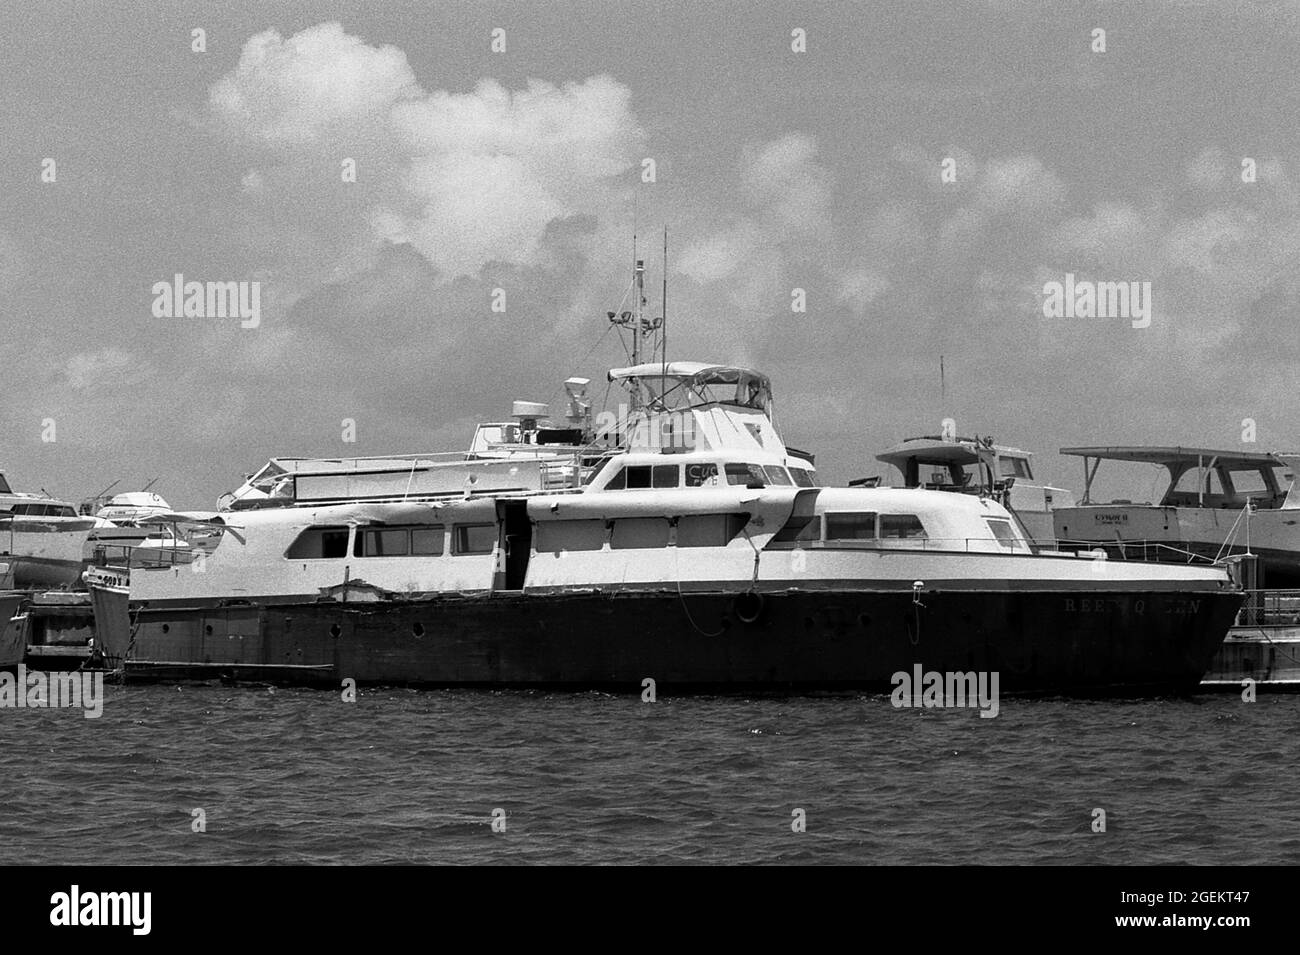 AJAXNETPHOTO. MAY, 1981. KEY WEST, FLA, USA. - IMPOUNDED MARIEL BOAT - REEF QUEEN, ONE OF THE MORE THAN 1,400 BOATS USED IN THE CUBAN MARIEL BOAT-LIFT ESCAPING REFUGEE EXODUS BETWEEN APRIL AND OCTOBER 1980 FROM CUBA TO THE FLORIDA KEYS AFTER BEING IMPOUNDED BY U.S. COASTGUARD AND CUSTOMS IN THE HARBOUR. REEF QUEEN SUFFERED DAMAGE TO HULL AND UPPERWORKS. THE BOATS BROUGHT APPROXIMATELY 125,000 FLEEING CUBANS TO THE USA.PHOTO:JONATHAN EASTLAND/AJAX REF:812805 19A 51 Stock Photo